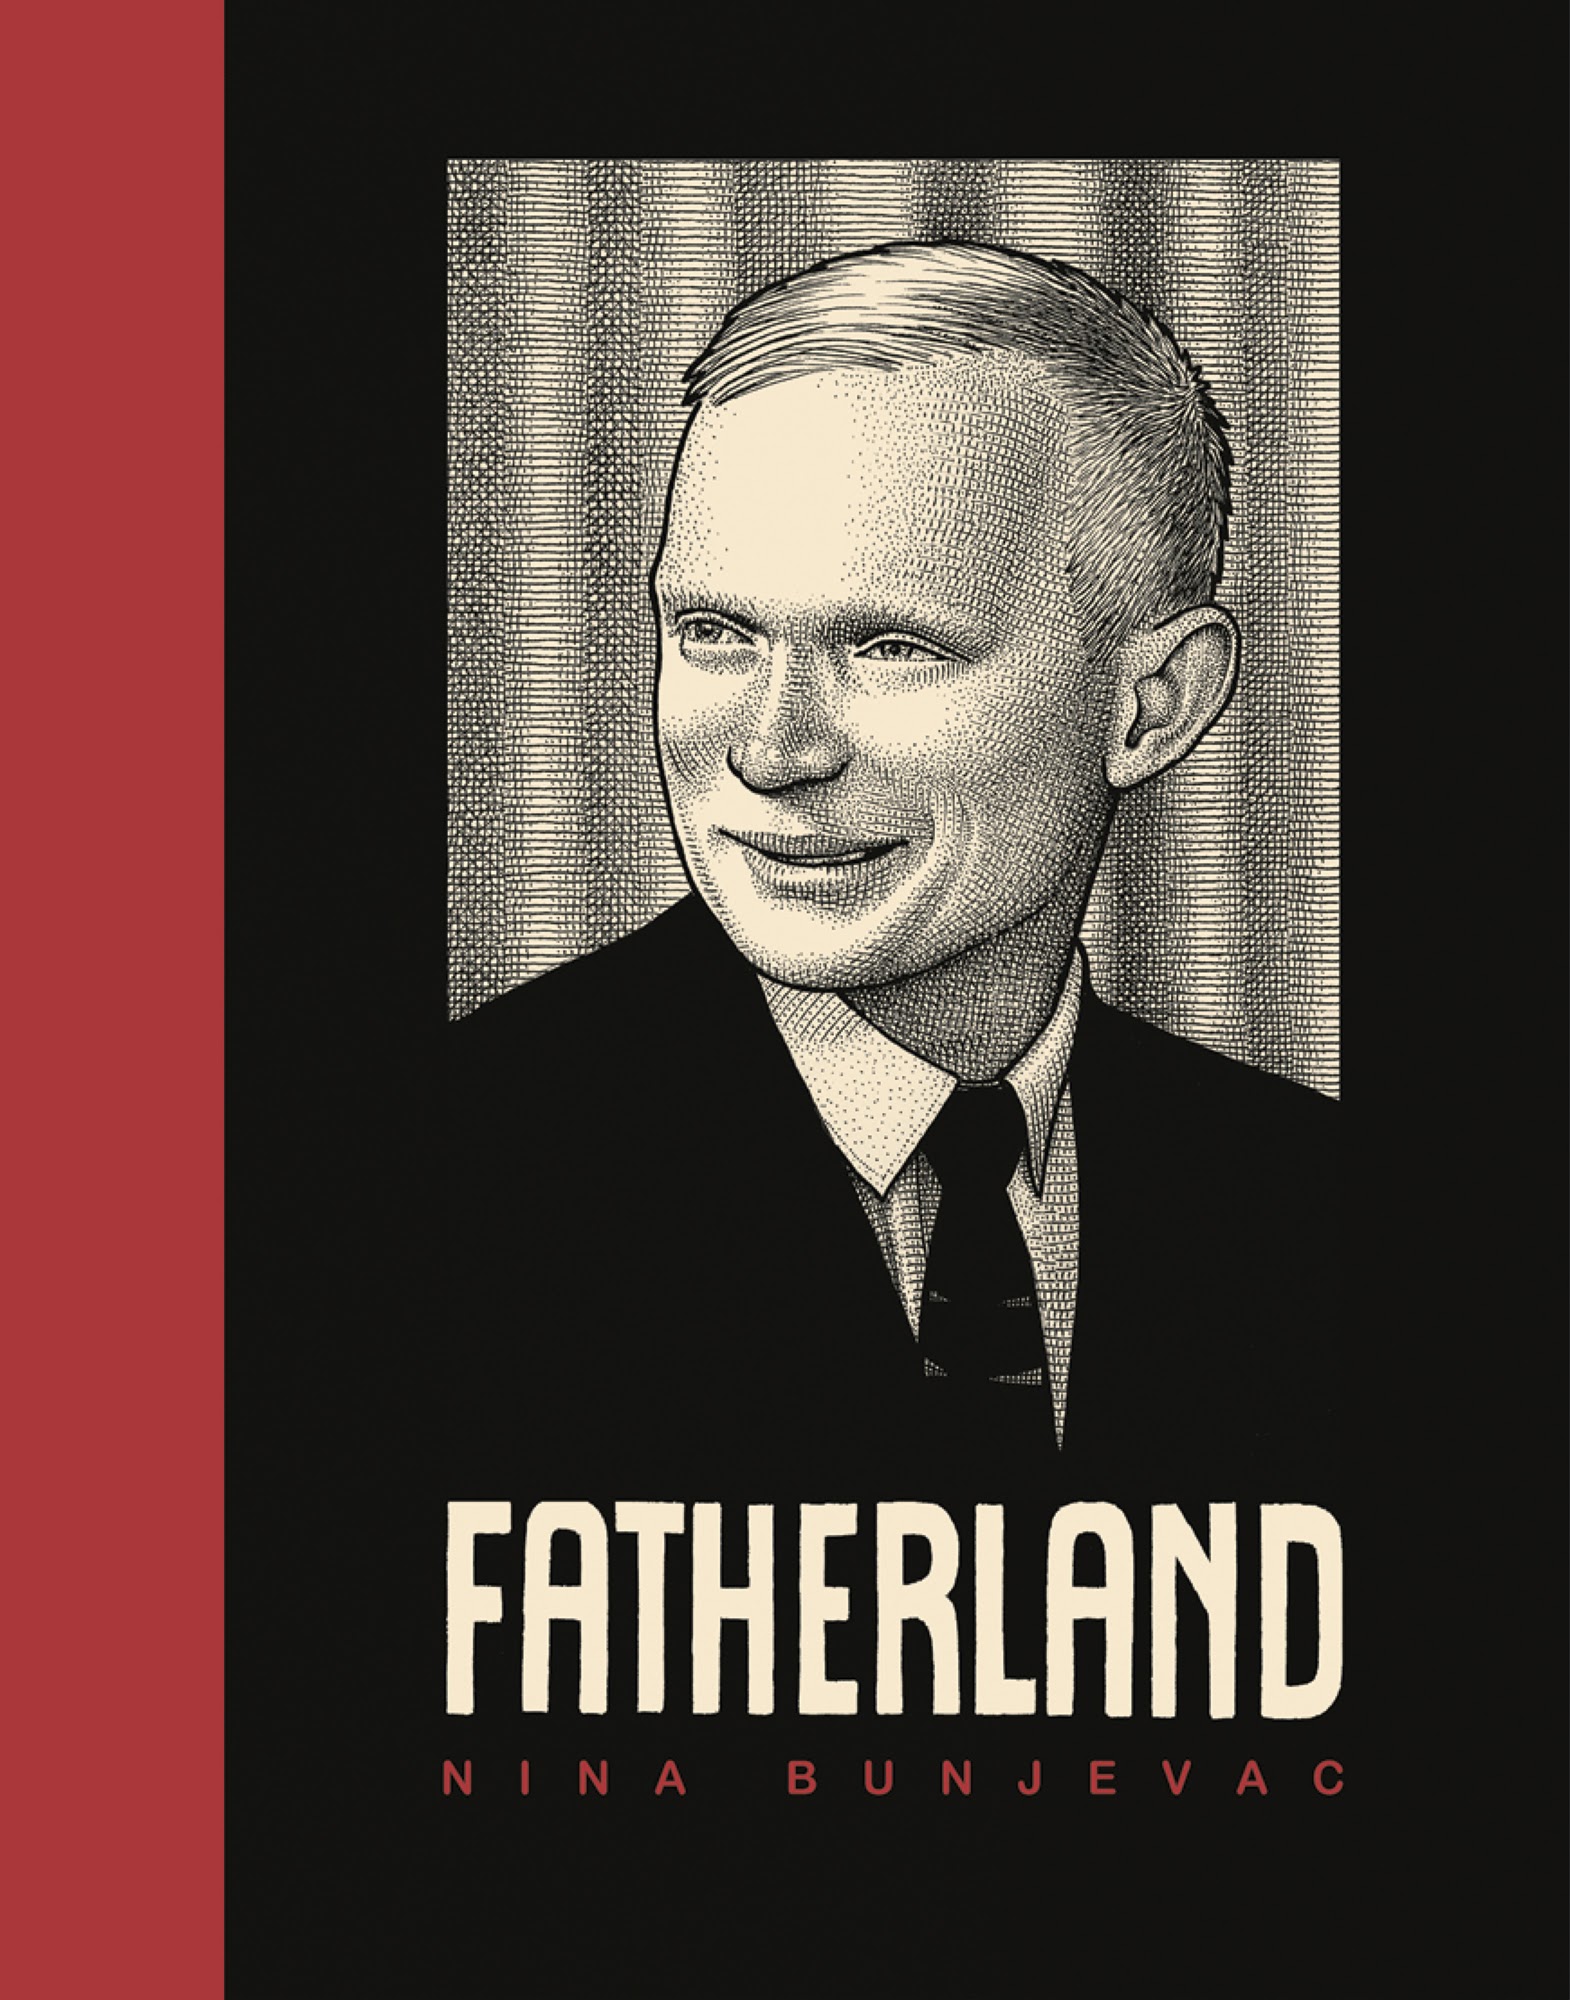 Read online Fatherland comic -  Issue # TPB (Part 1) - 1